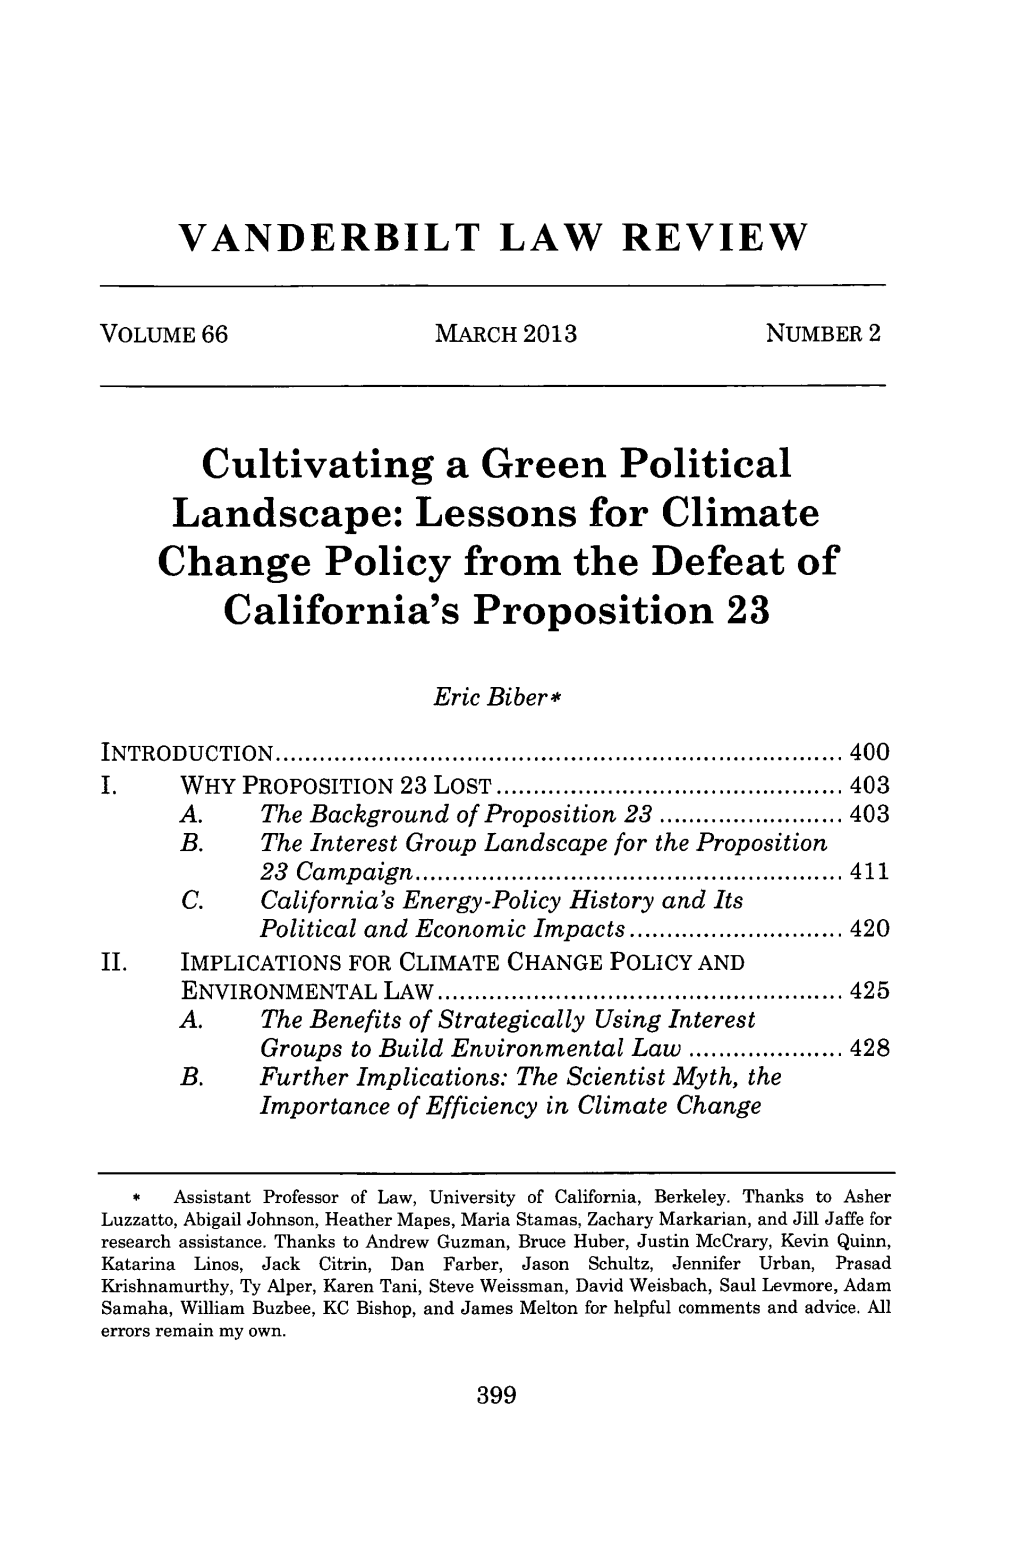 Lessons for Climate Change Policy from the Defeat of California's Proposition 23